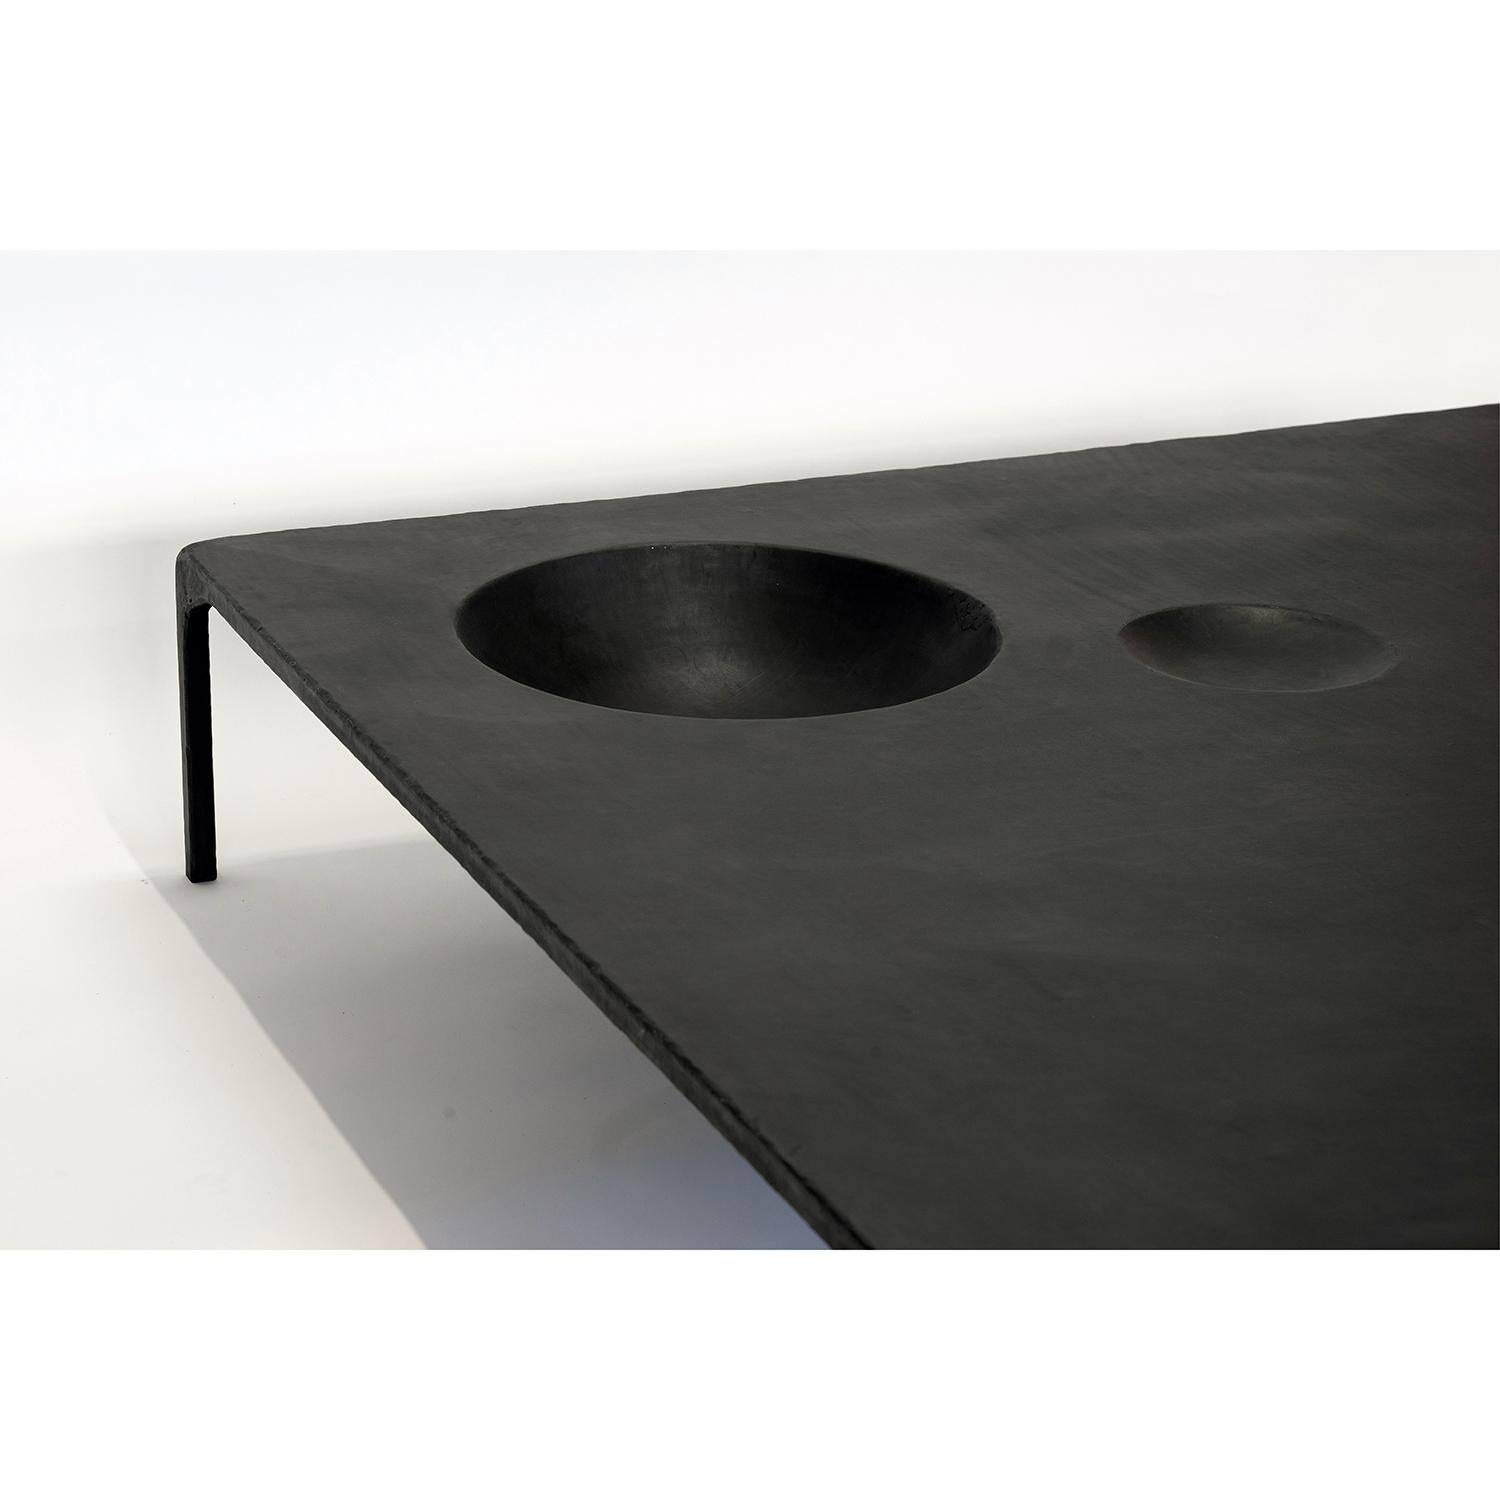 Contemporary Large Modern Coffee Table Handmade Geometric Negative Space Voids Blacked Steel